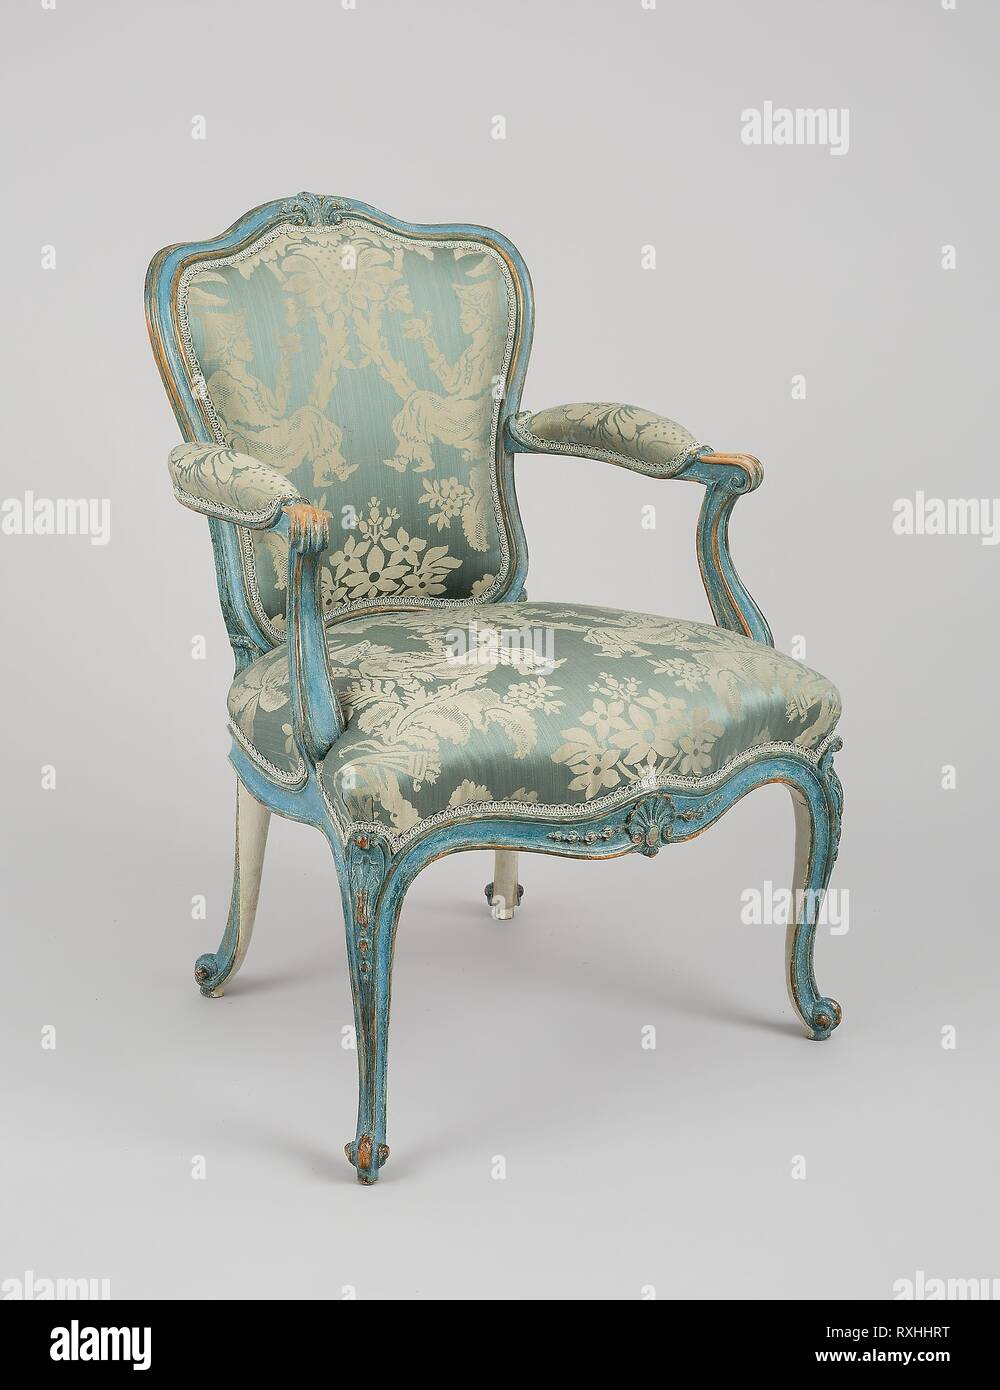 Armchair. Thomas Chippendale; English, 1718-1779; London, England. Date: 1768. Dimensions: 90.2 × 62.2 × 55.9 cm (35 1/2 × 24 1/2 × 22 in.). Painted oak, modern upholstery. Origin: England. Museum: The Chicago Art Institute. Stock Photo